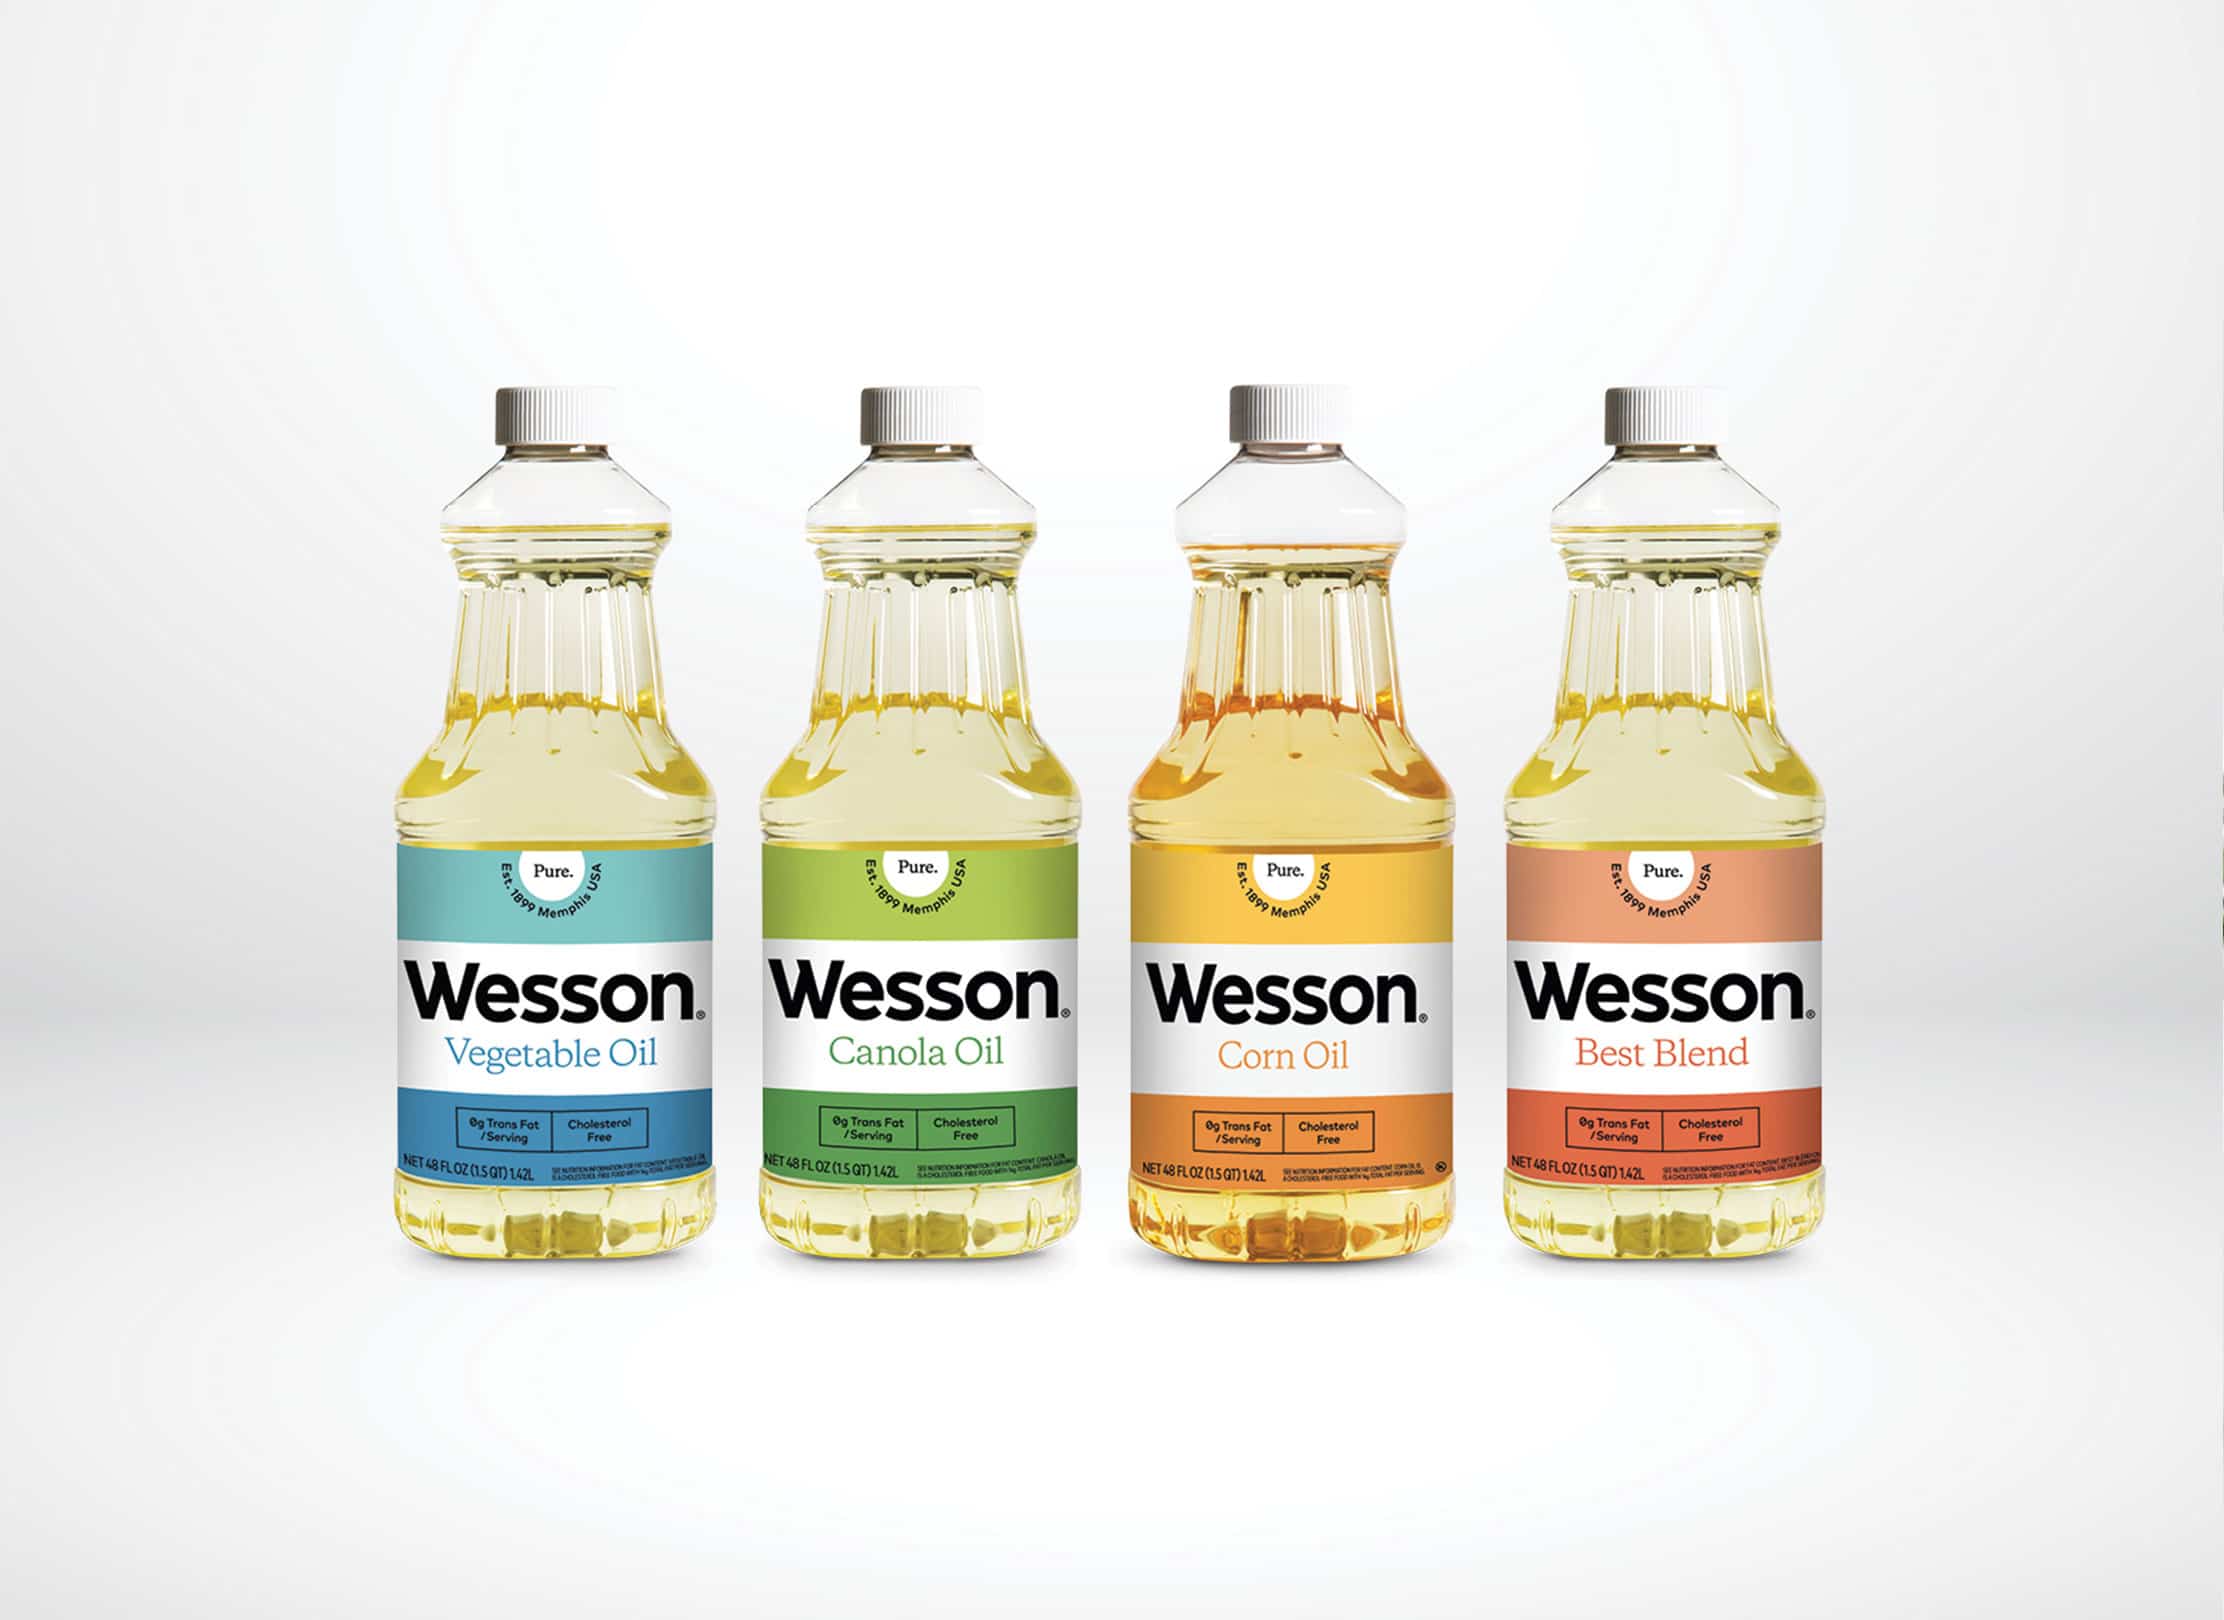 Featured image for “2022 – Market leader Wesson Oil returns to spotlight with major brand refresh￼”